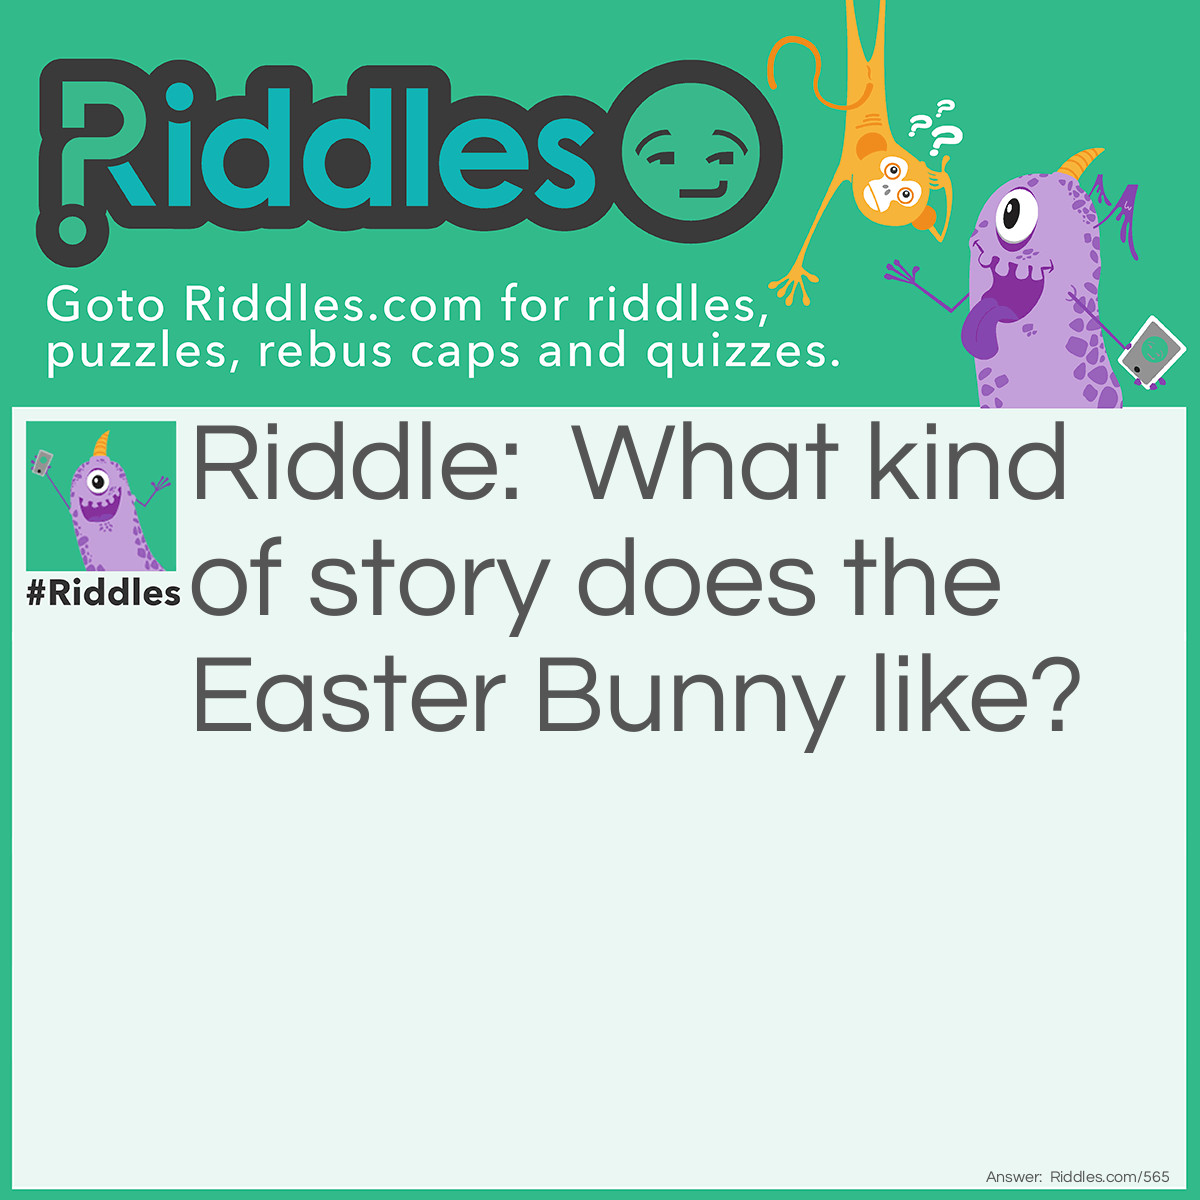 Riddle: What kind of story does the <a href="https://www.riddles.com/quiz/easter-riddles">Easter</a> Bunny like? Answer: One's with hoppy endings!